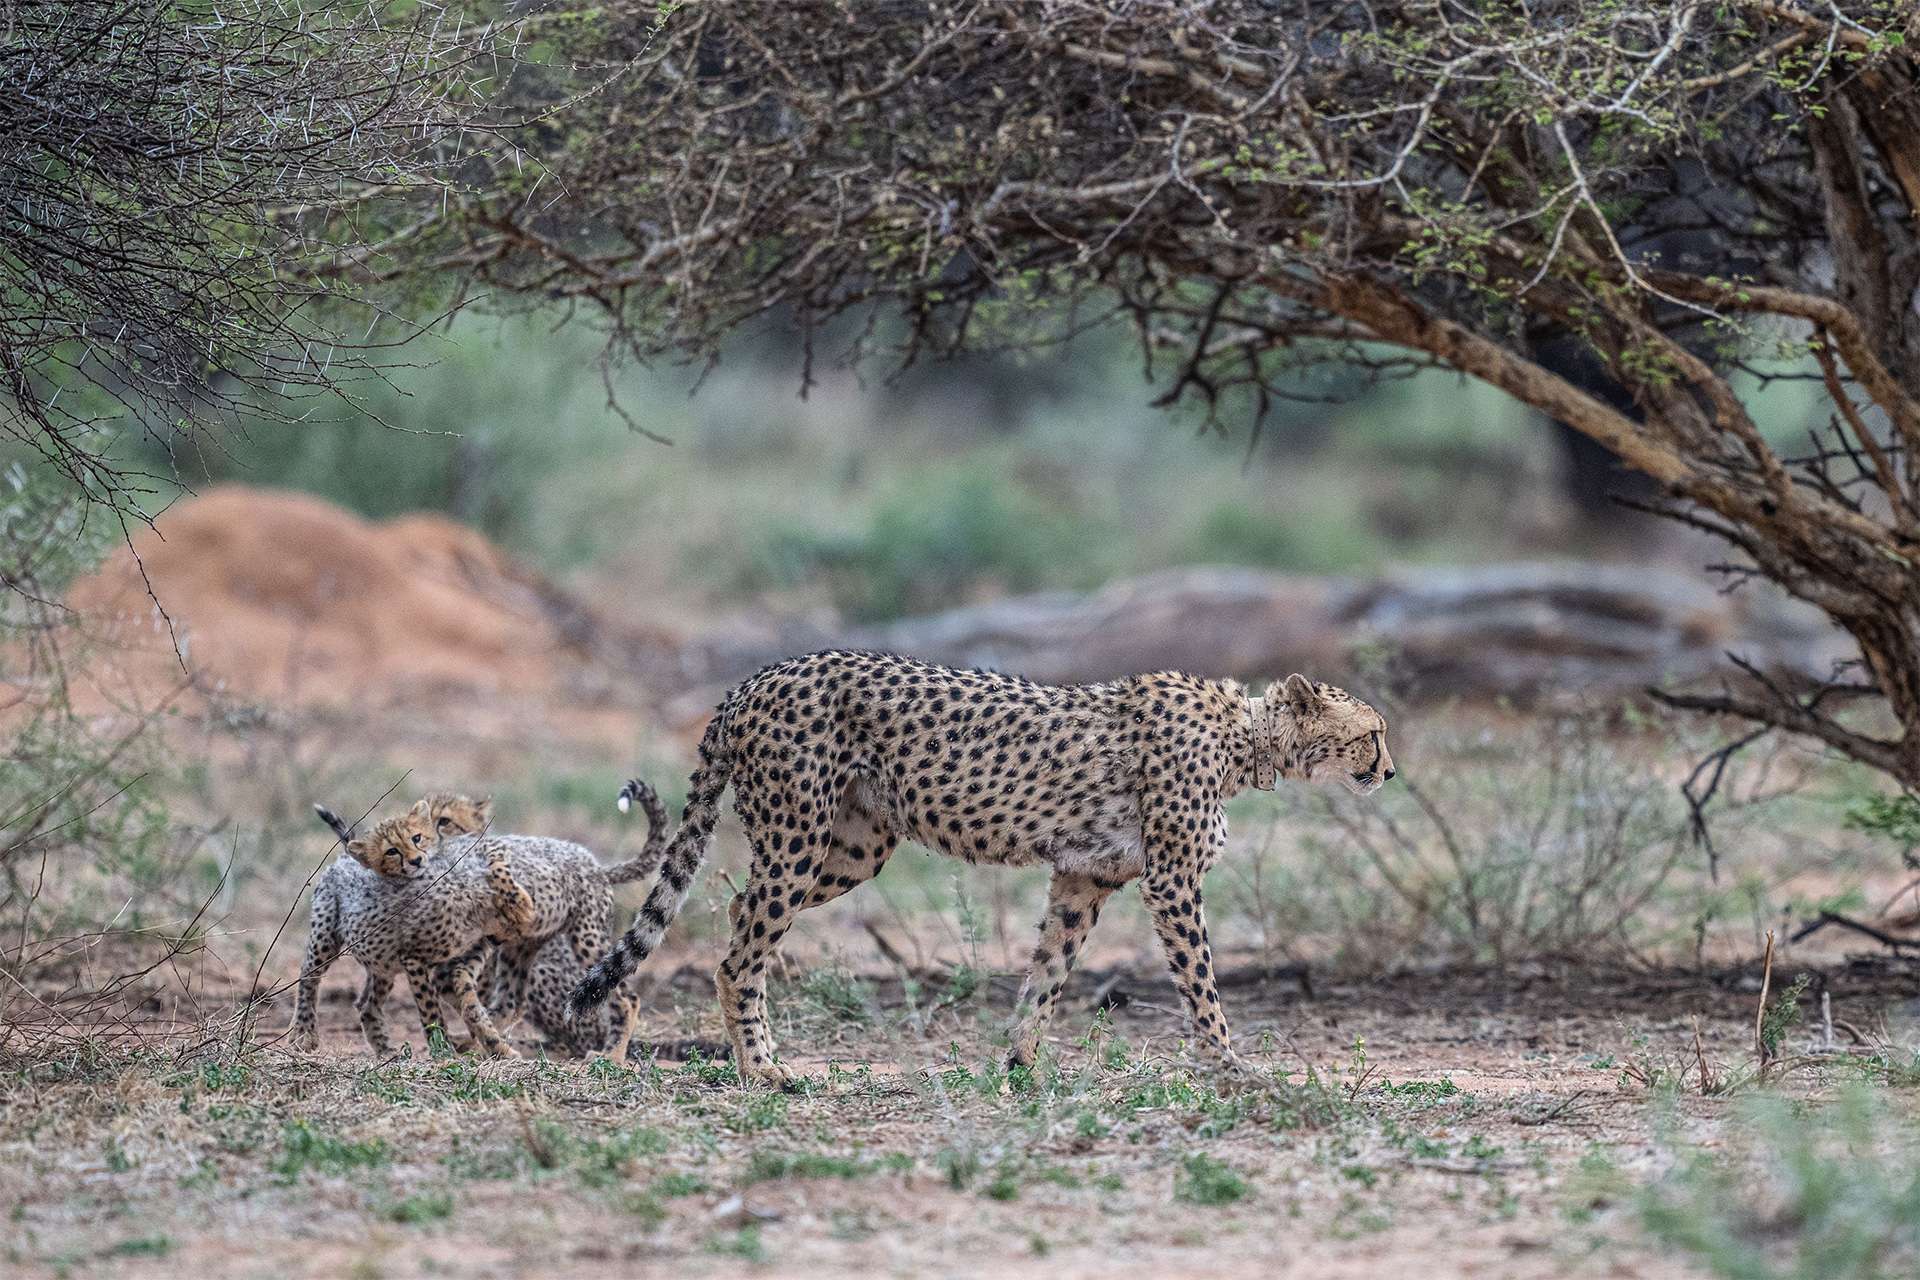 Mother cheetah with tracking collar raises two playful cubs